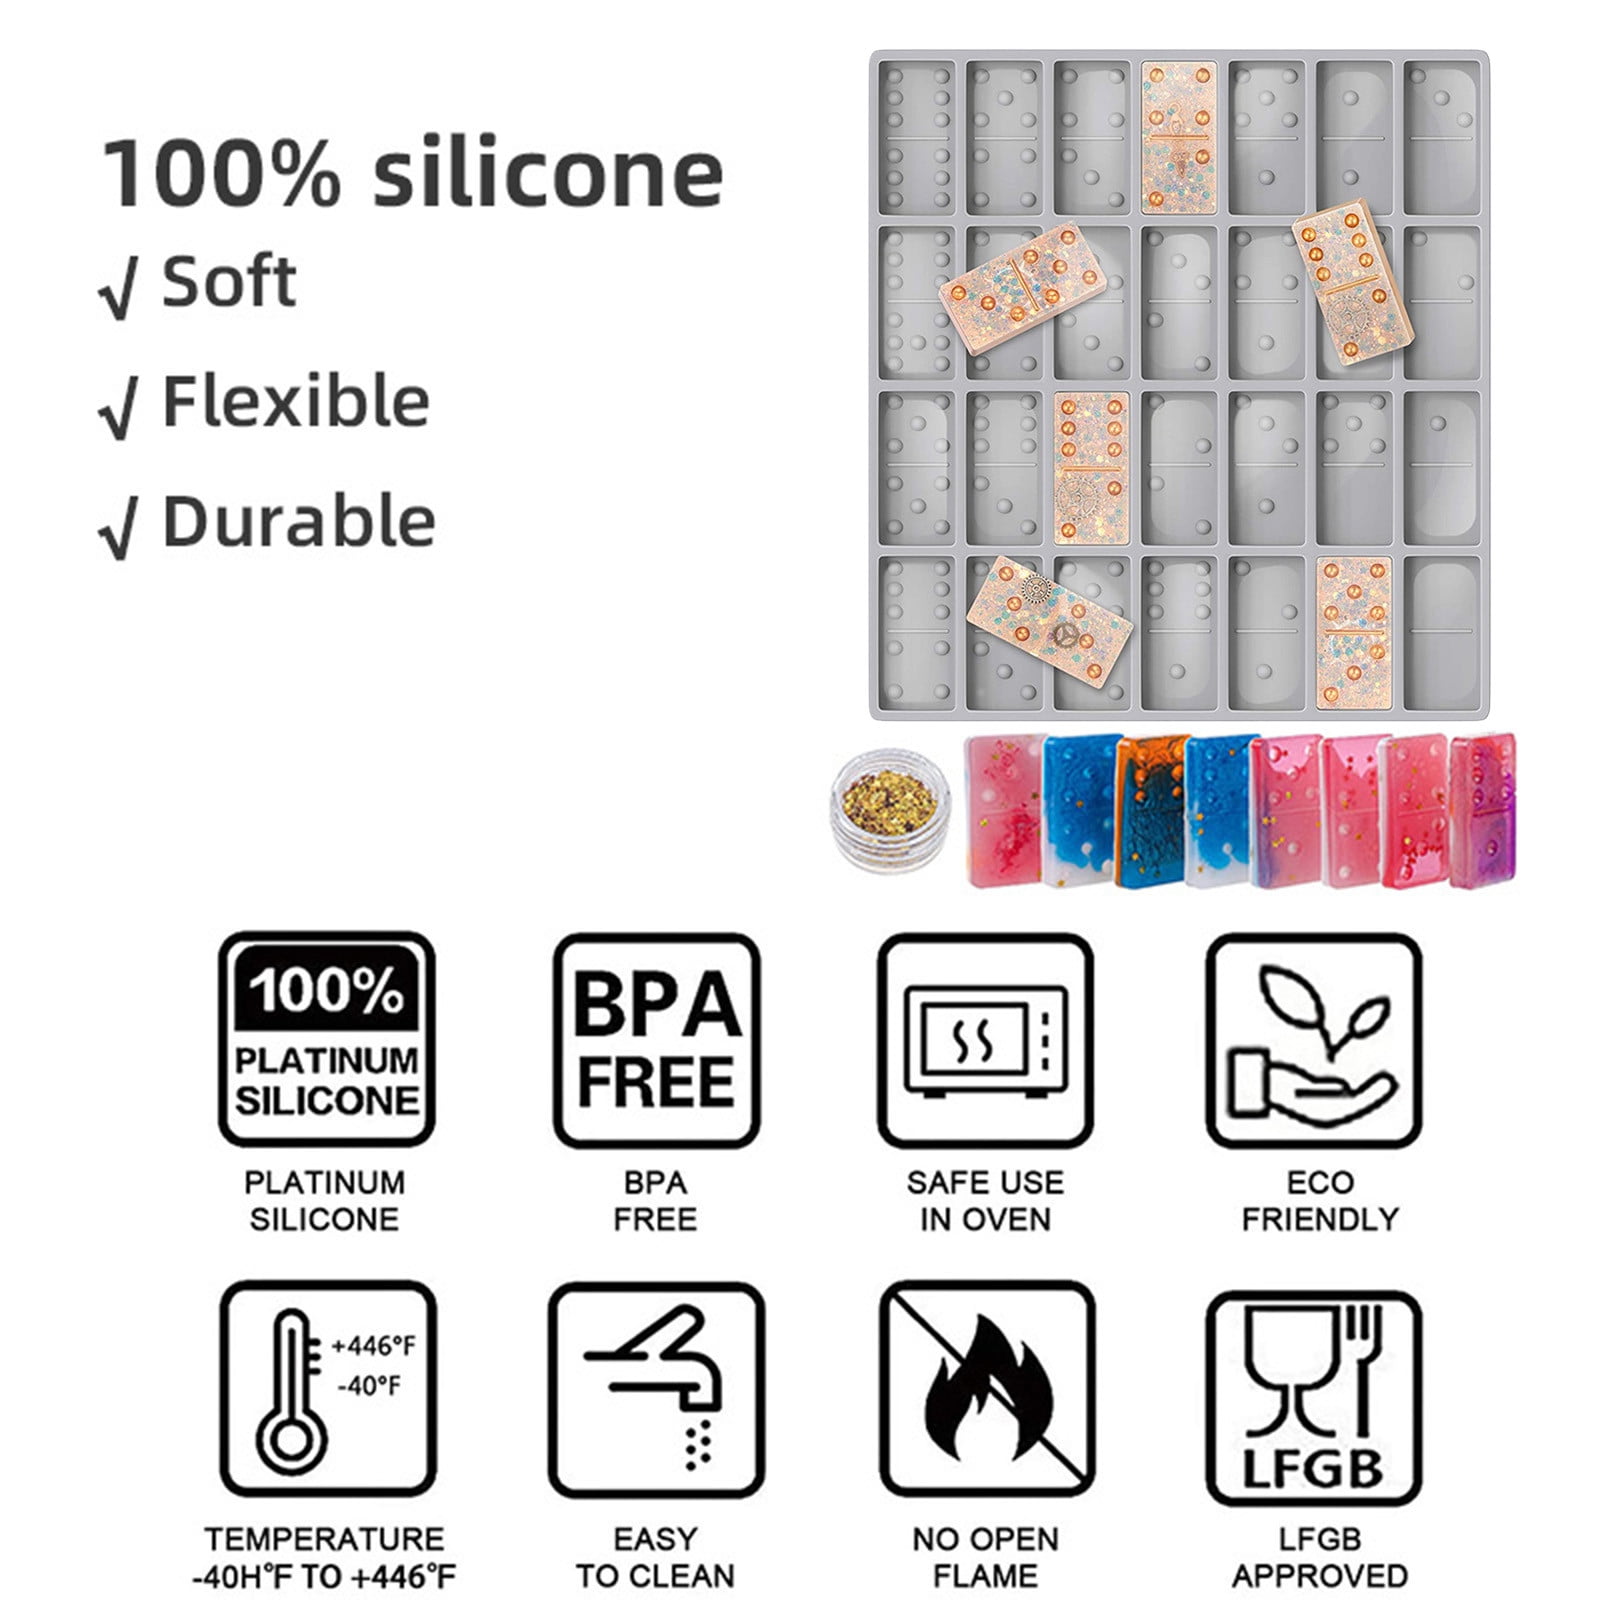 VerPetridure Silicone Domino Mould Resin Domino Mirror Epoxy Resin Abrasive  Mould Toy Grey Silicone Domino Mold Resin Domino Mirror Epoxy Resin  Abrasive Mold Toy 